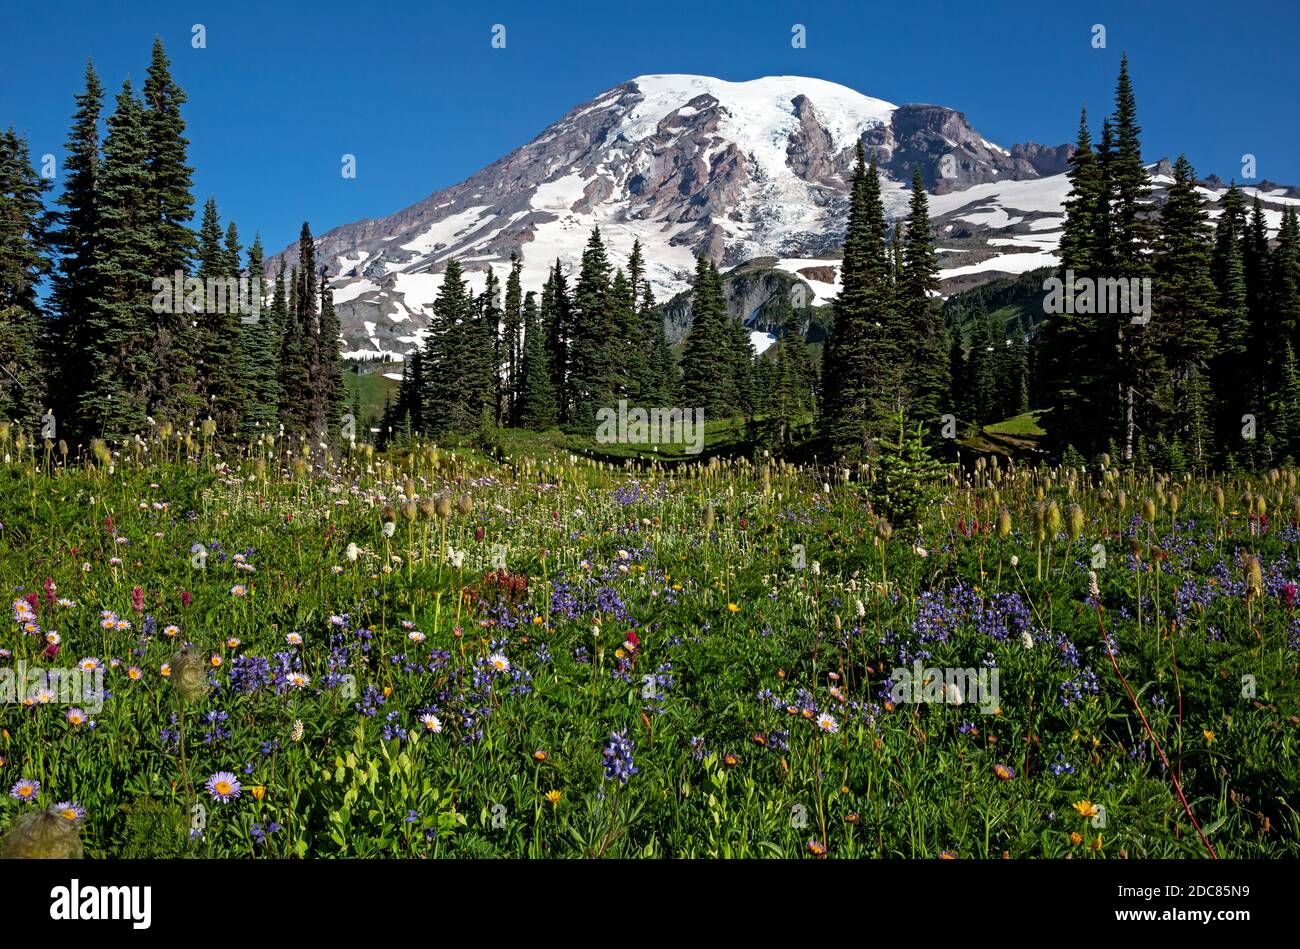 WA18262-00...WASHINGTON - The Mountain Daisy blooming among the paintbrush and the Western Anemone in a meadow on Mazama Ridge in Olympic National Par Stock Photo